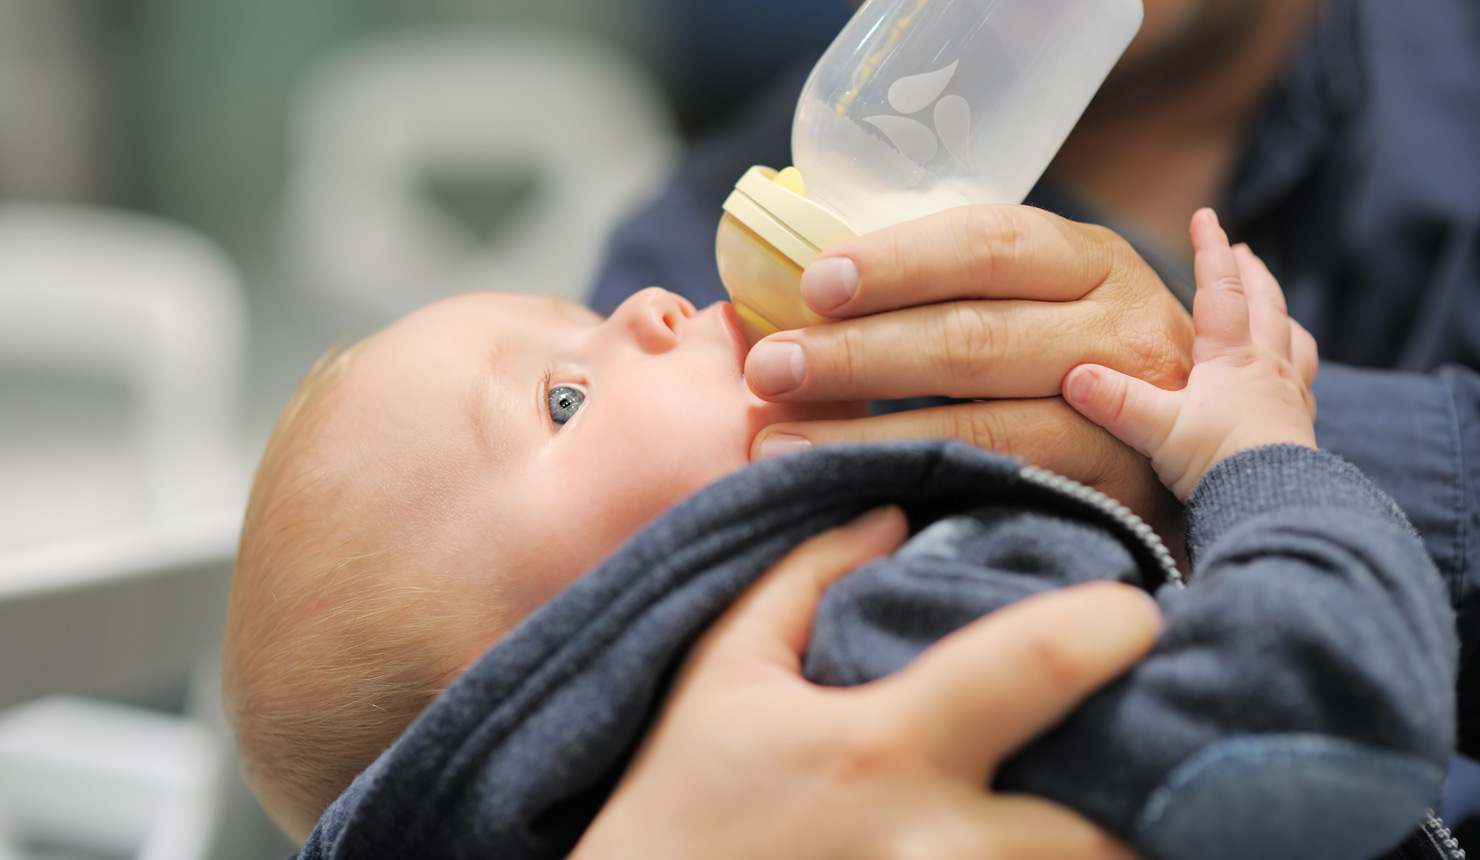 Baby formula poses higher arsenic risk to newborns than breast milk, Dartmouth study shows